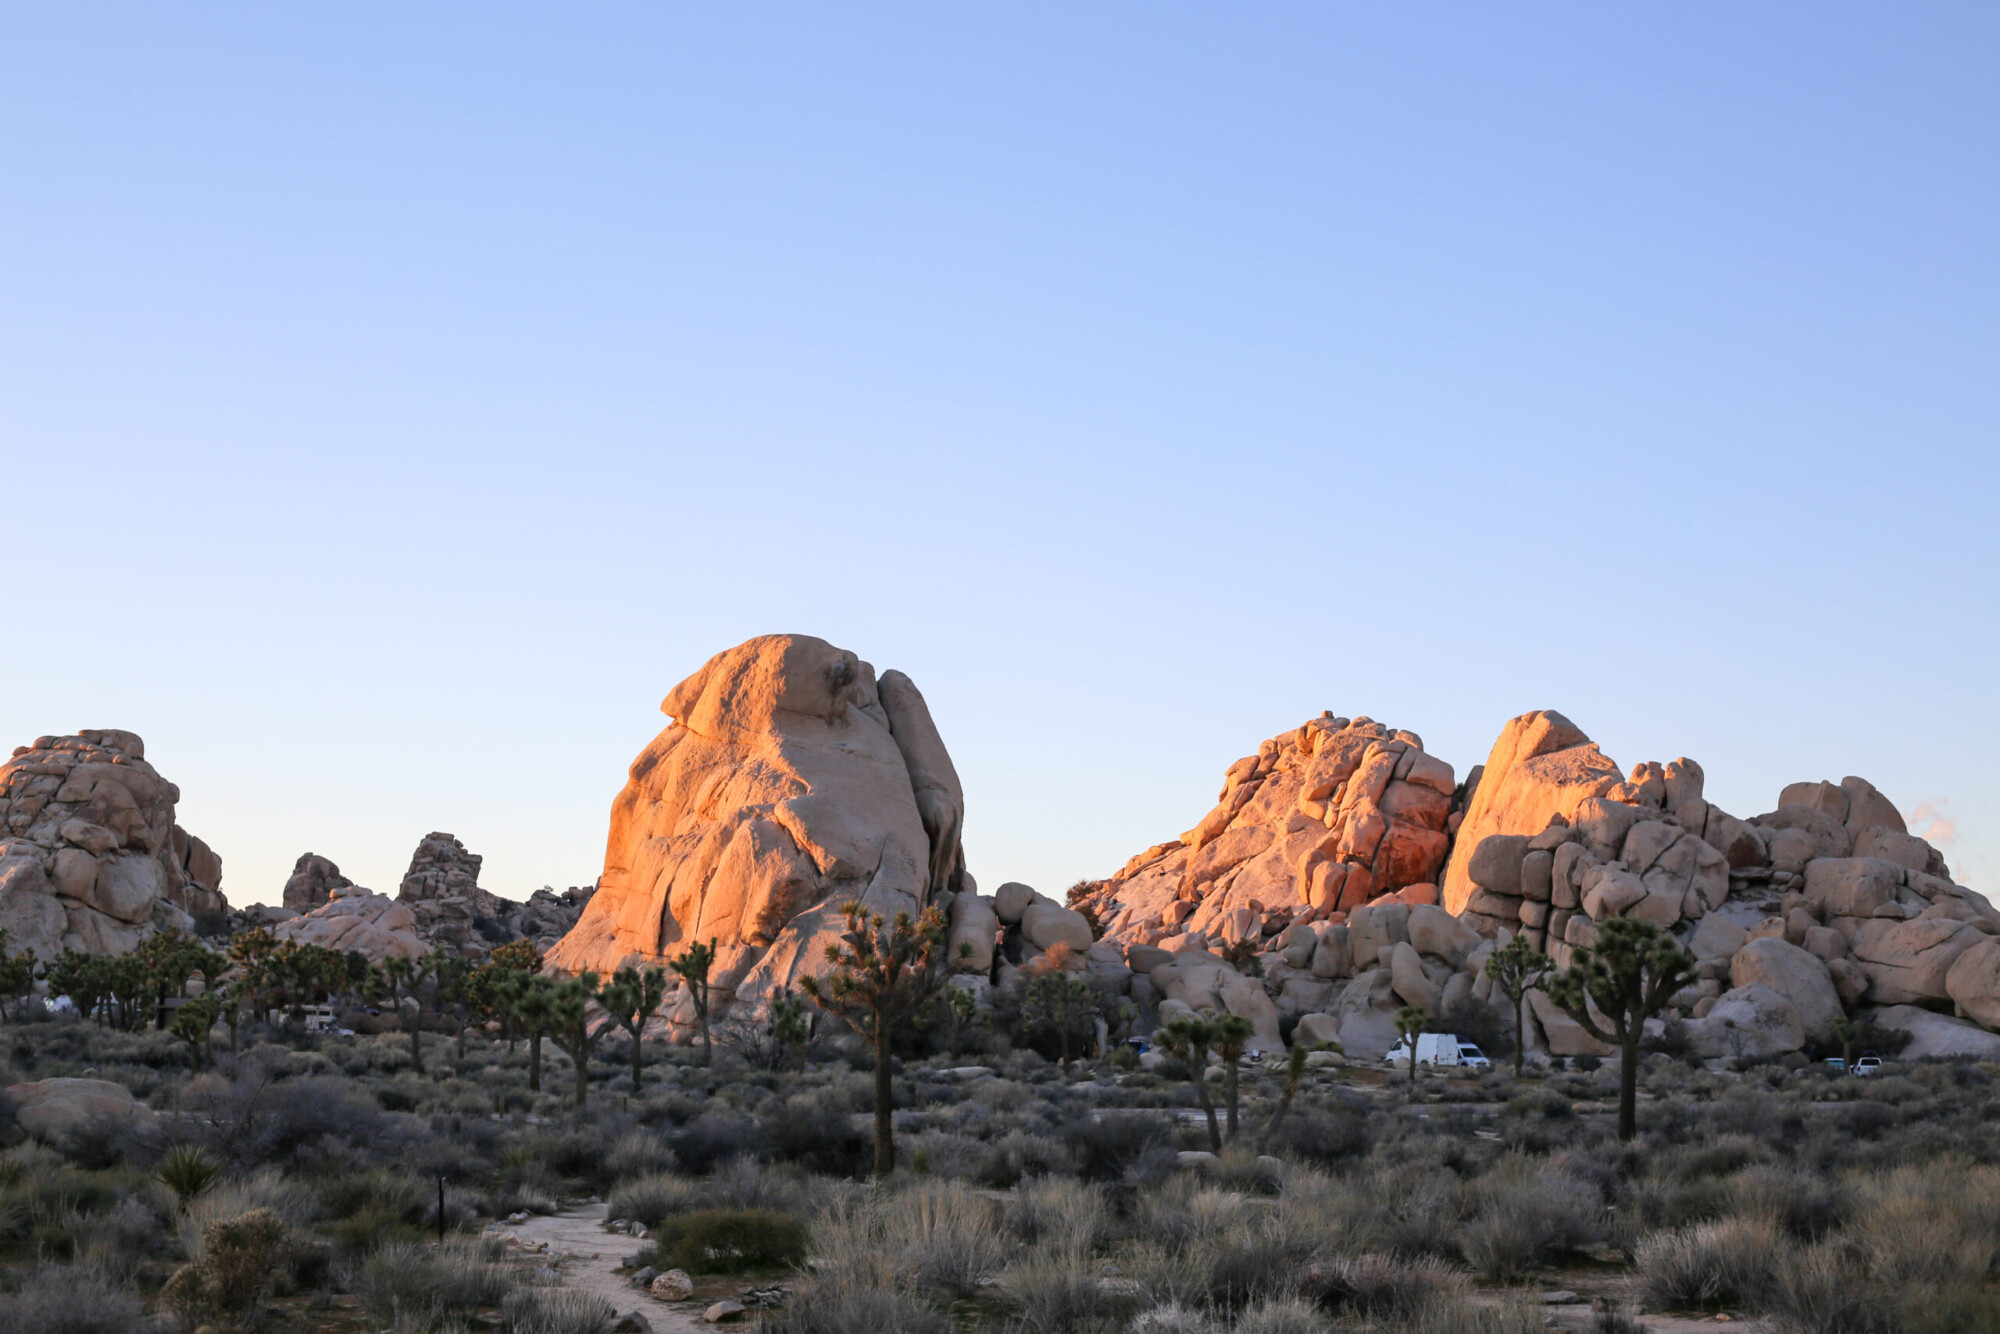 Landscape view of Joshua Trees with large boulder formations in the background in Joshua Tree National Park, California.